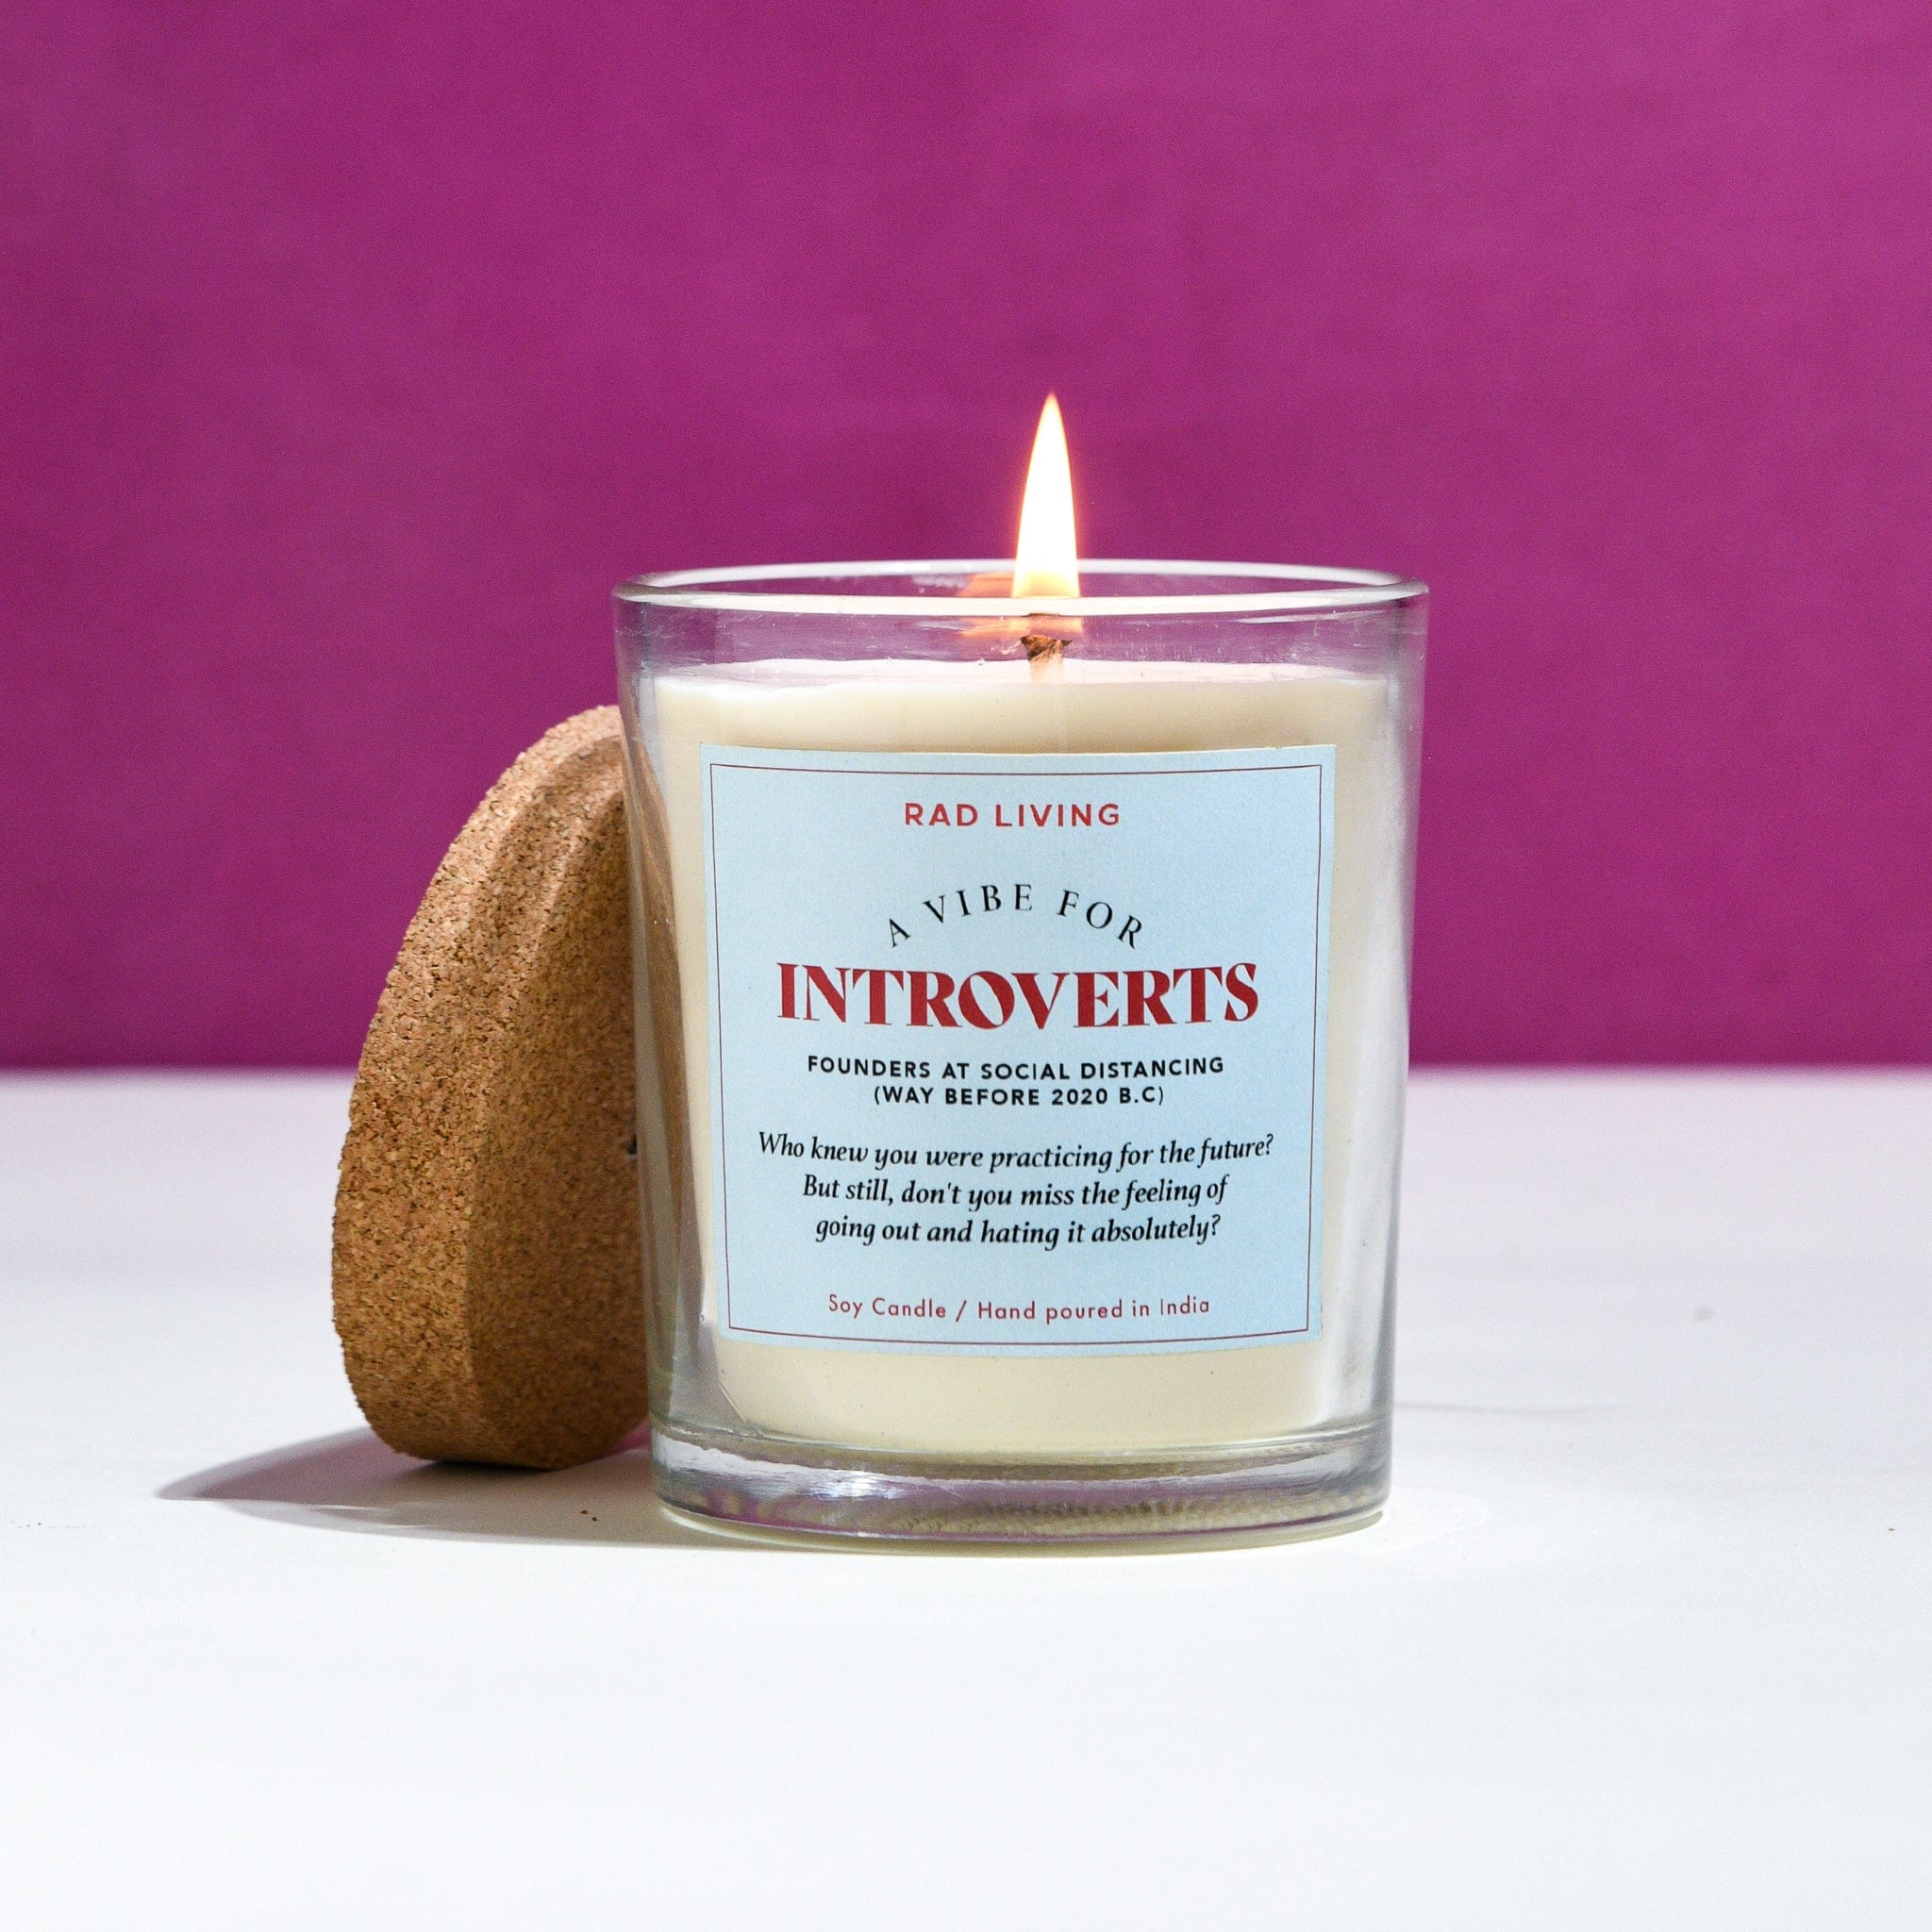 Introverts - Cinnamon Mocha Scented Candle